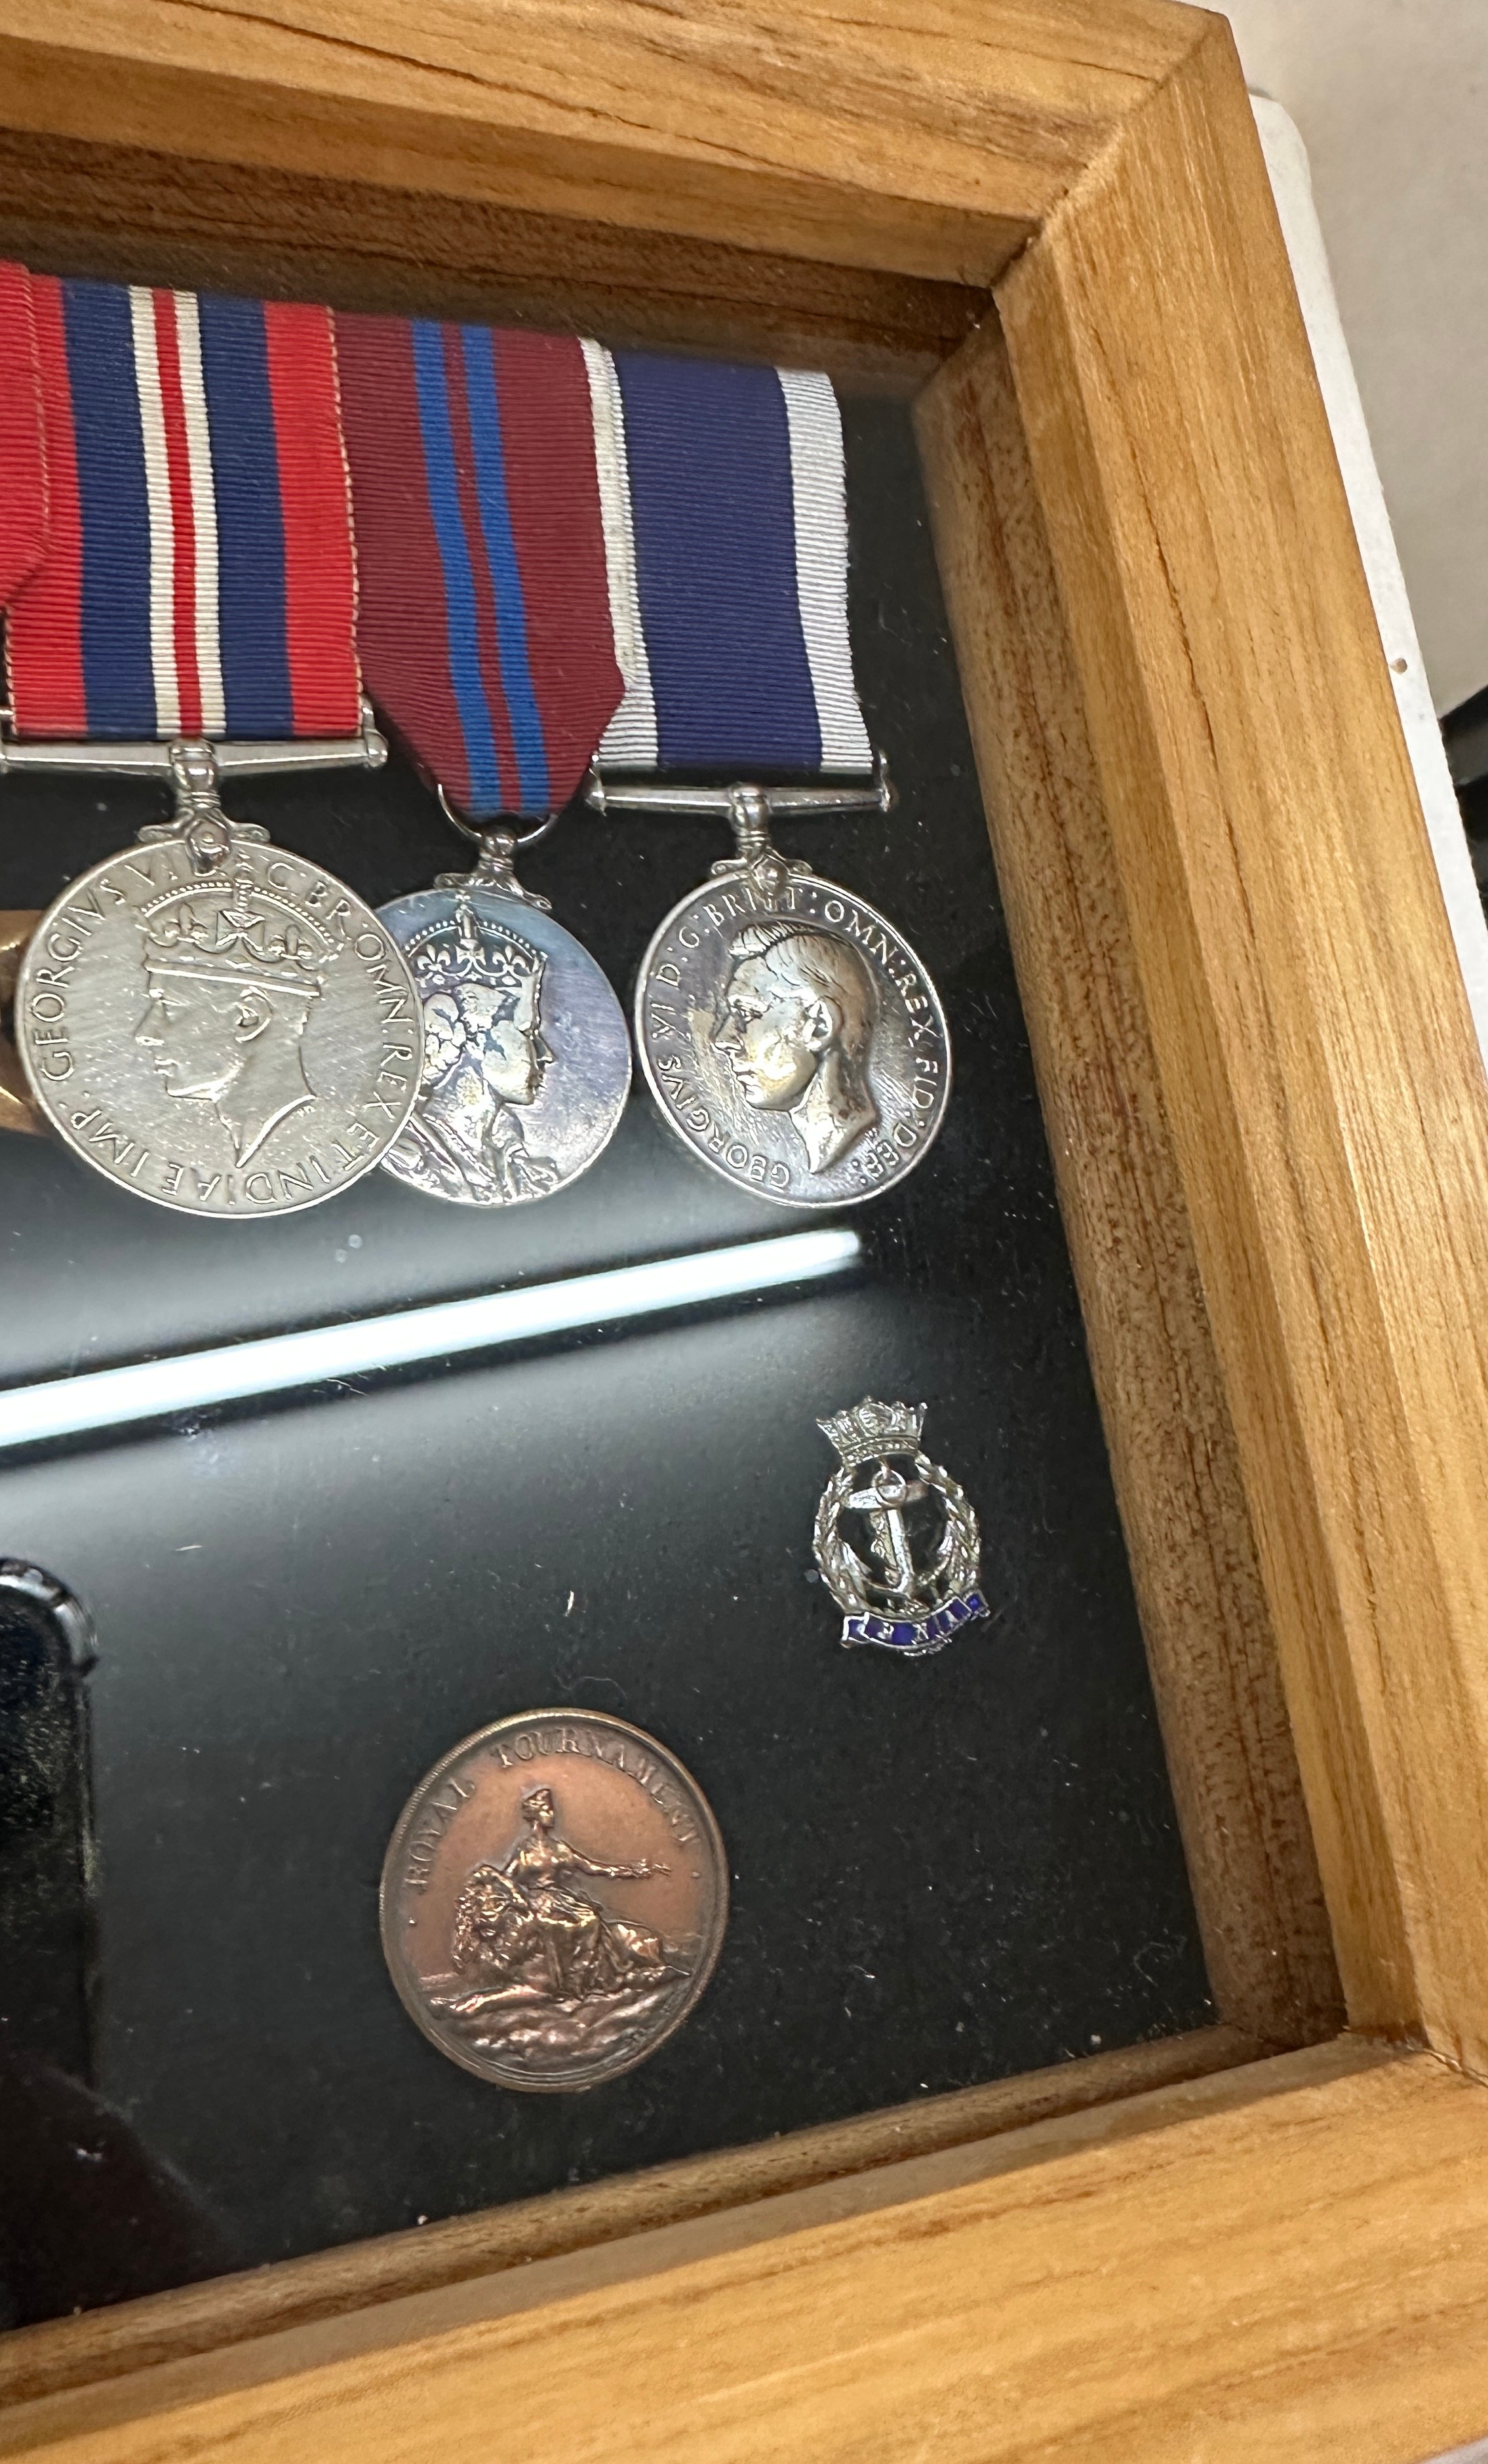 Cased WW2 medal set to Lewis Keens Chief Petty Officer JX 141277, includes Long service medal, paper - Image 10 of 14